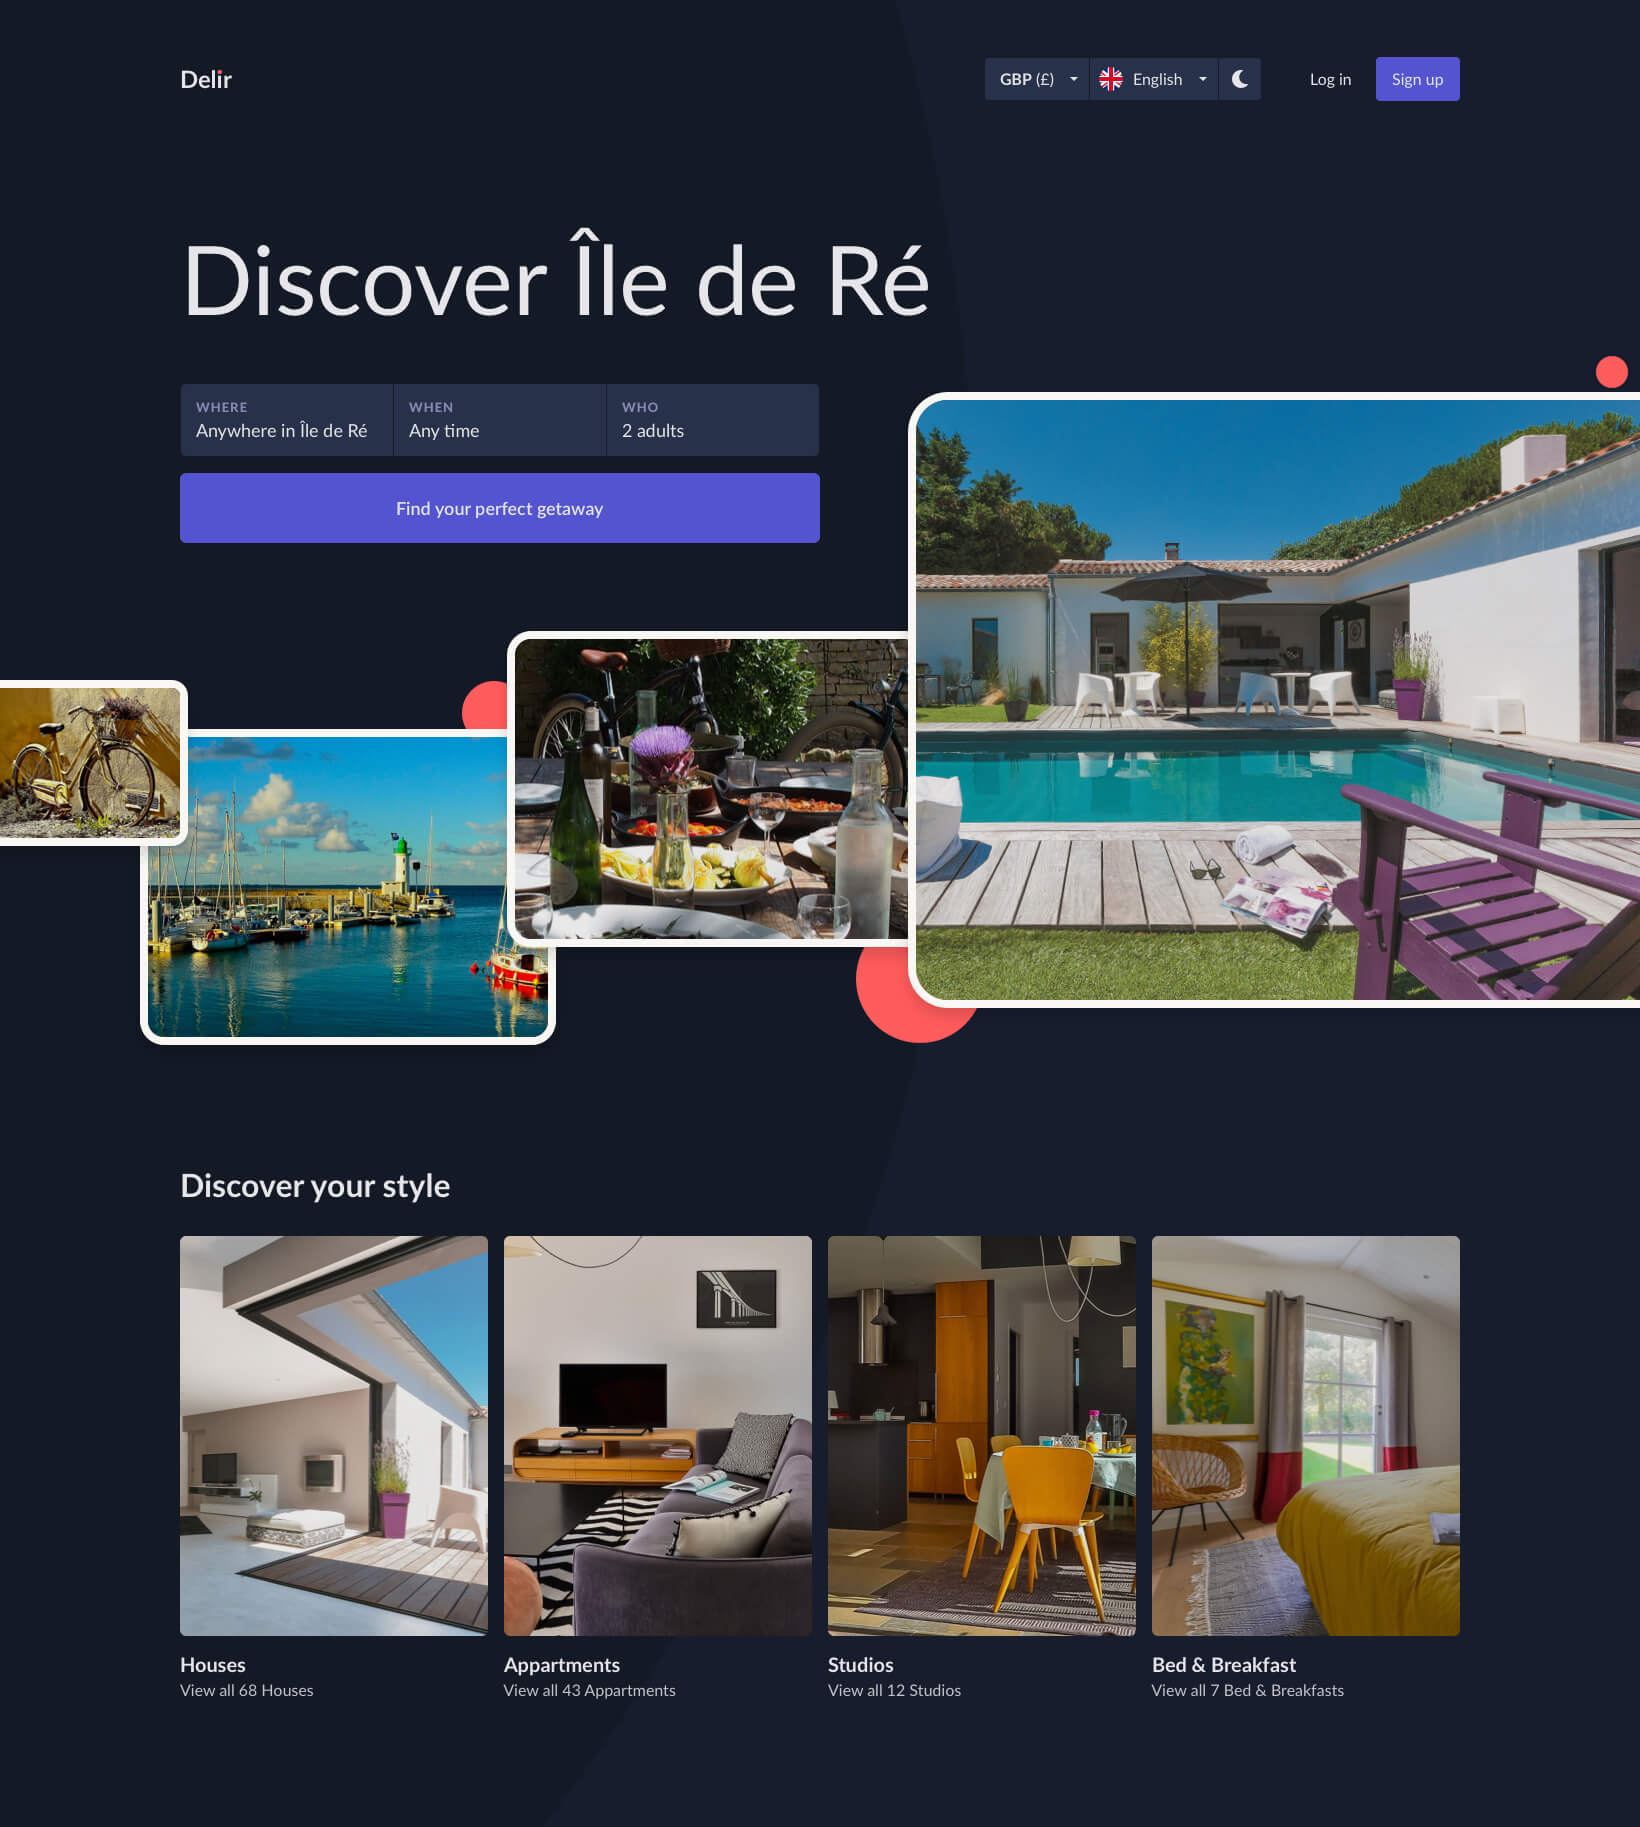 A mockup of Delir homepage, which allows travellers to find accommodation in Île de Ré.